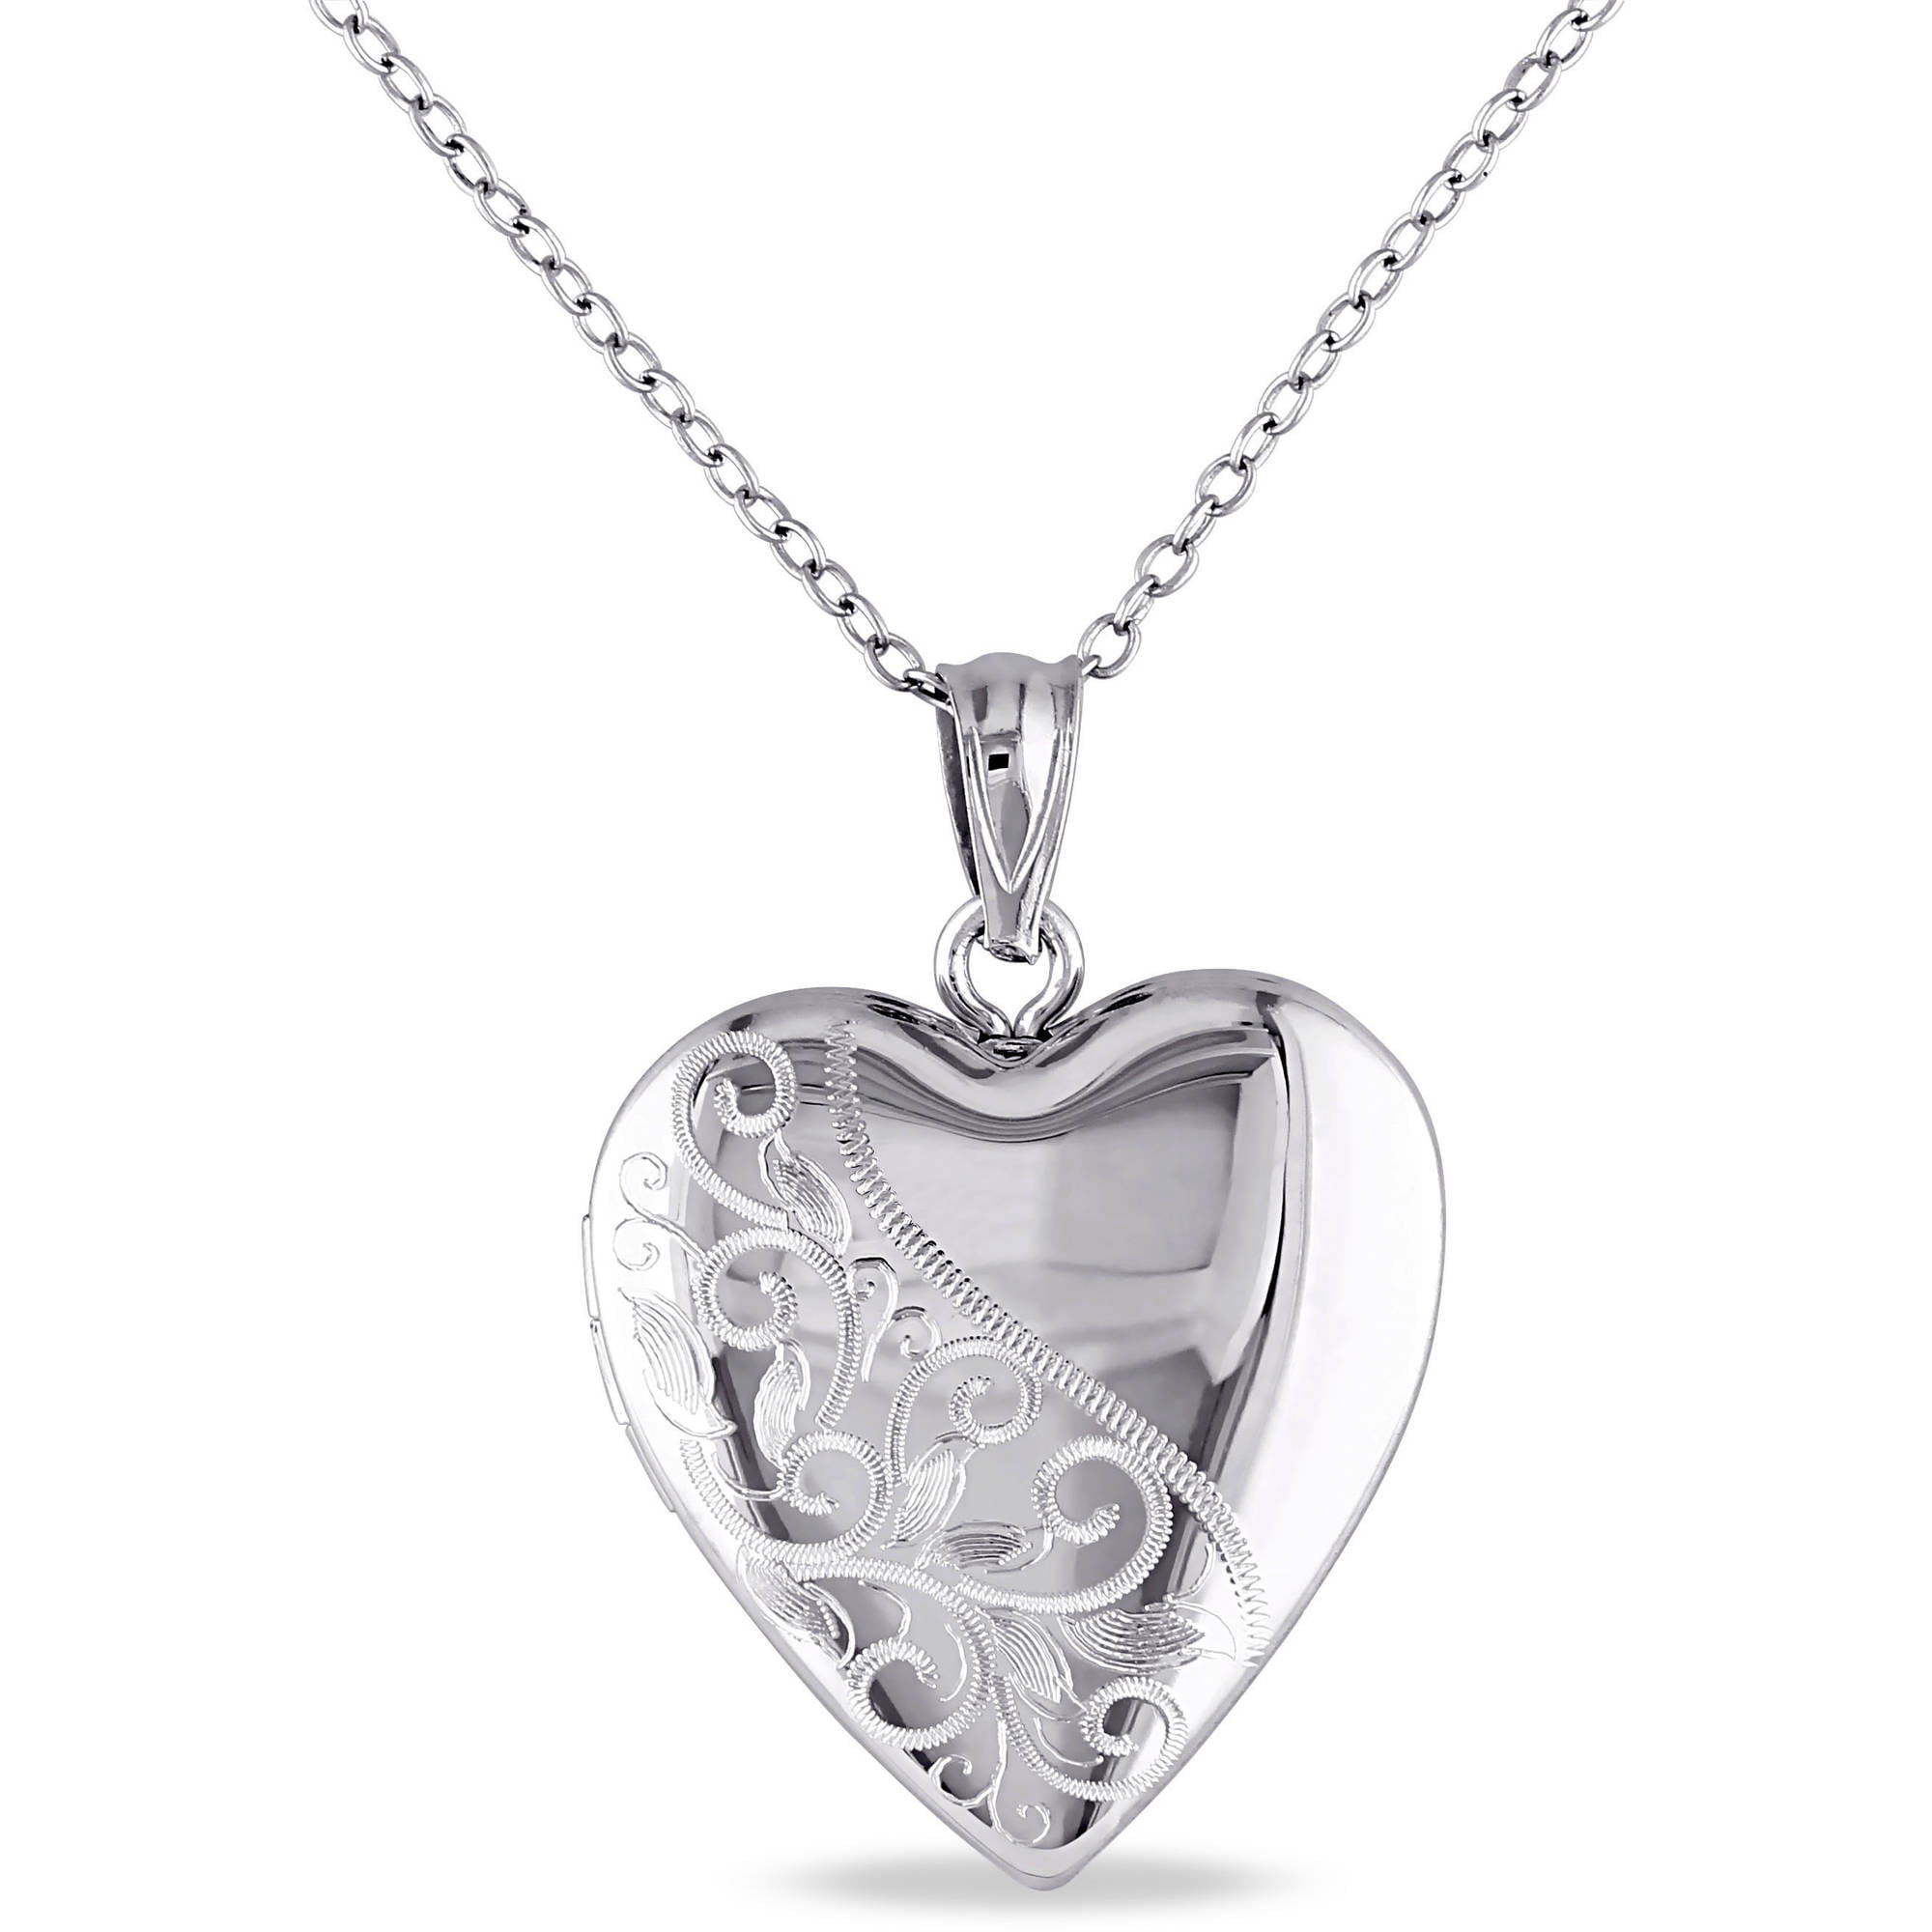 Silver Heart Hands Necklace Love Pendant Womens Silver Fashion Jewellery 18" 